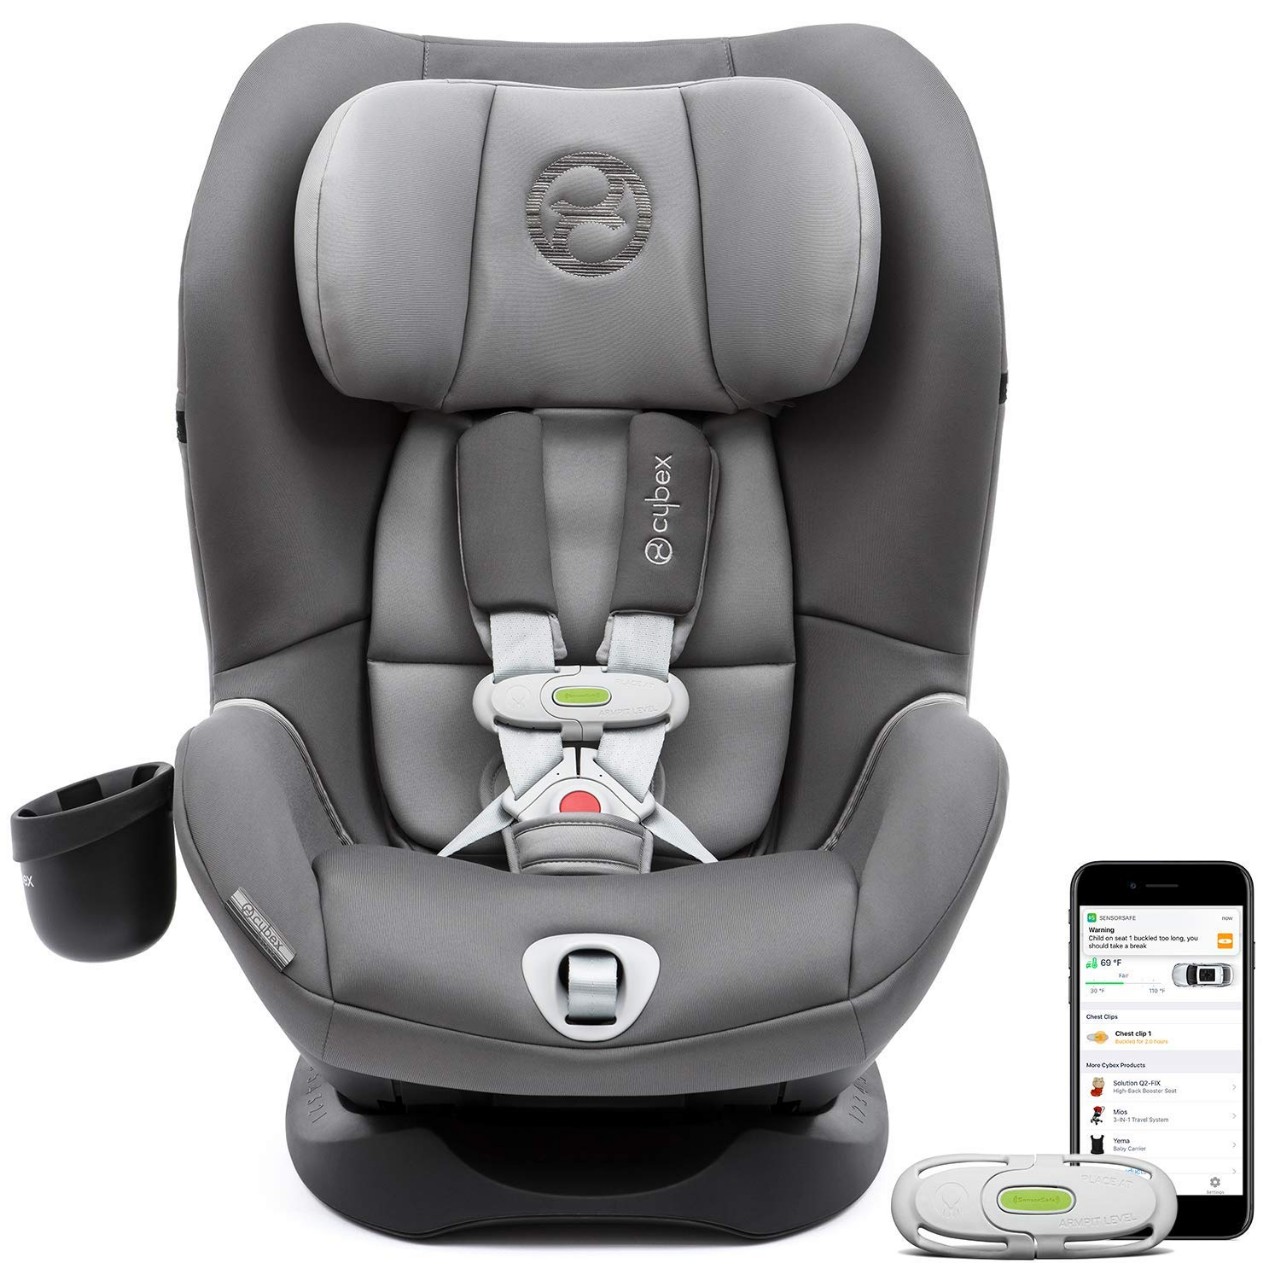 CYBEX Sirona M with SensorSafe Convertible Car Seat, 5-Point Harness Chest Clip with Built-in Sensor